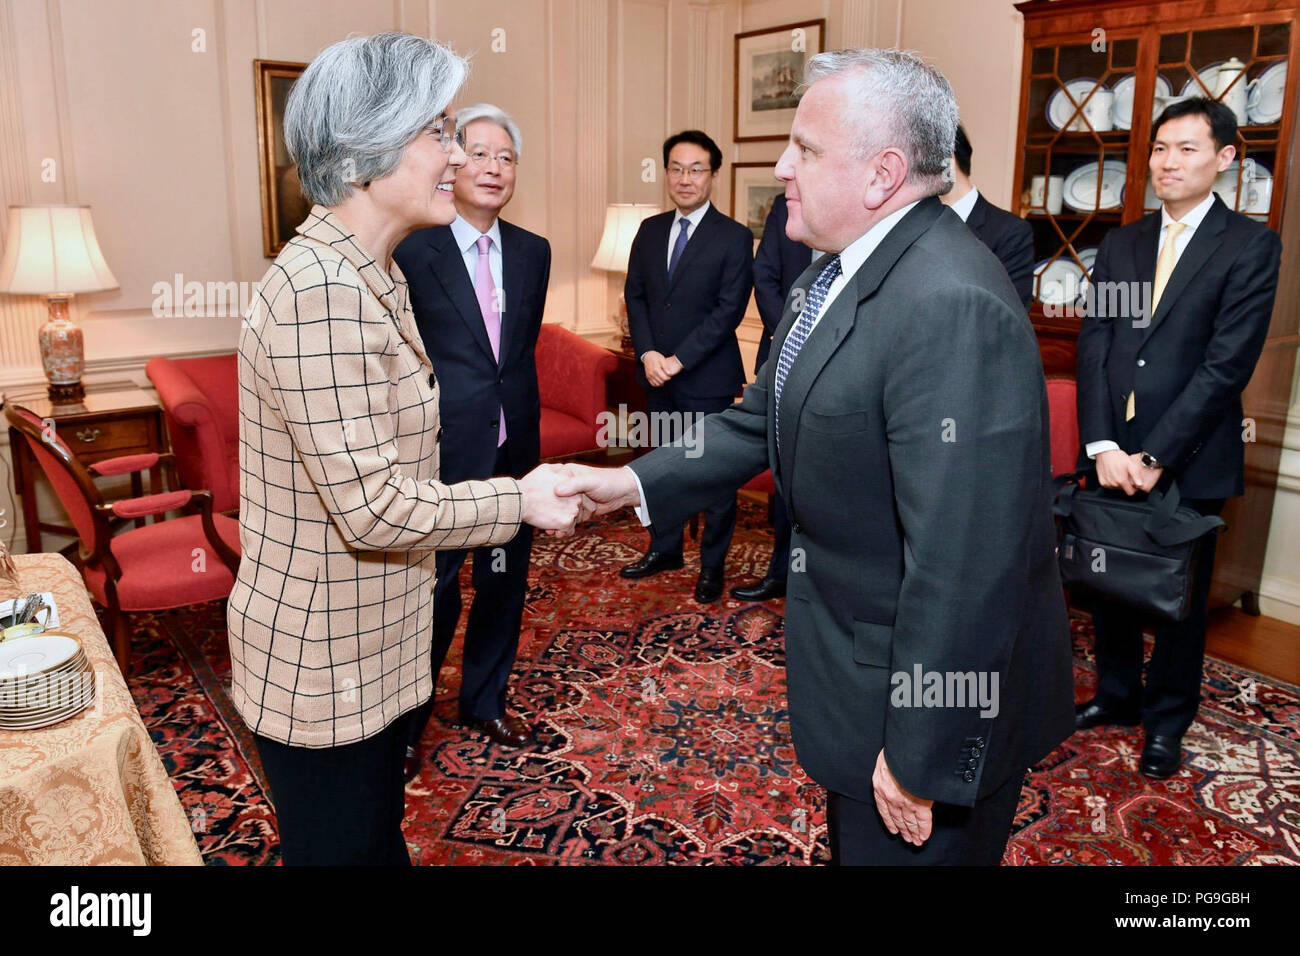 Deputy Secretary of State John Sullivan greets Republic of Korea Foreign Minister Kang Kyung-wha before they address reporters at the U.S. Department of State in Washington, D.C. on March 16, 2018. Stock Photo